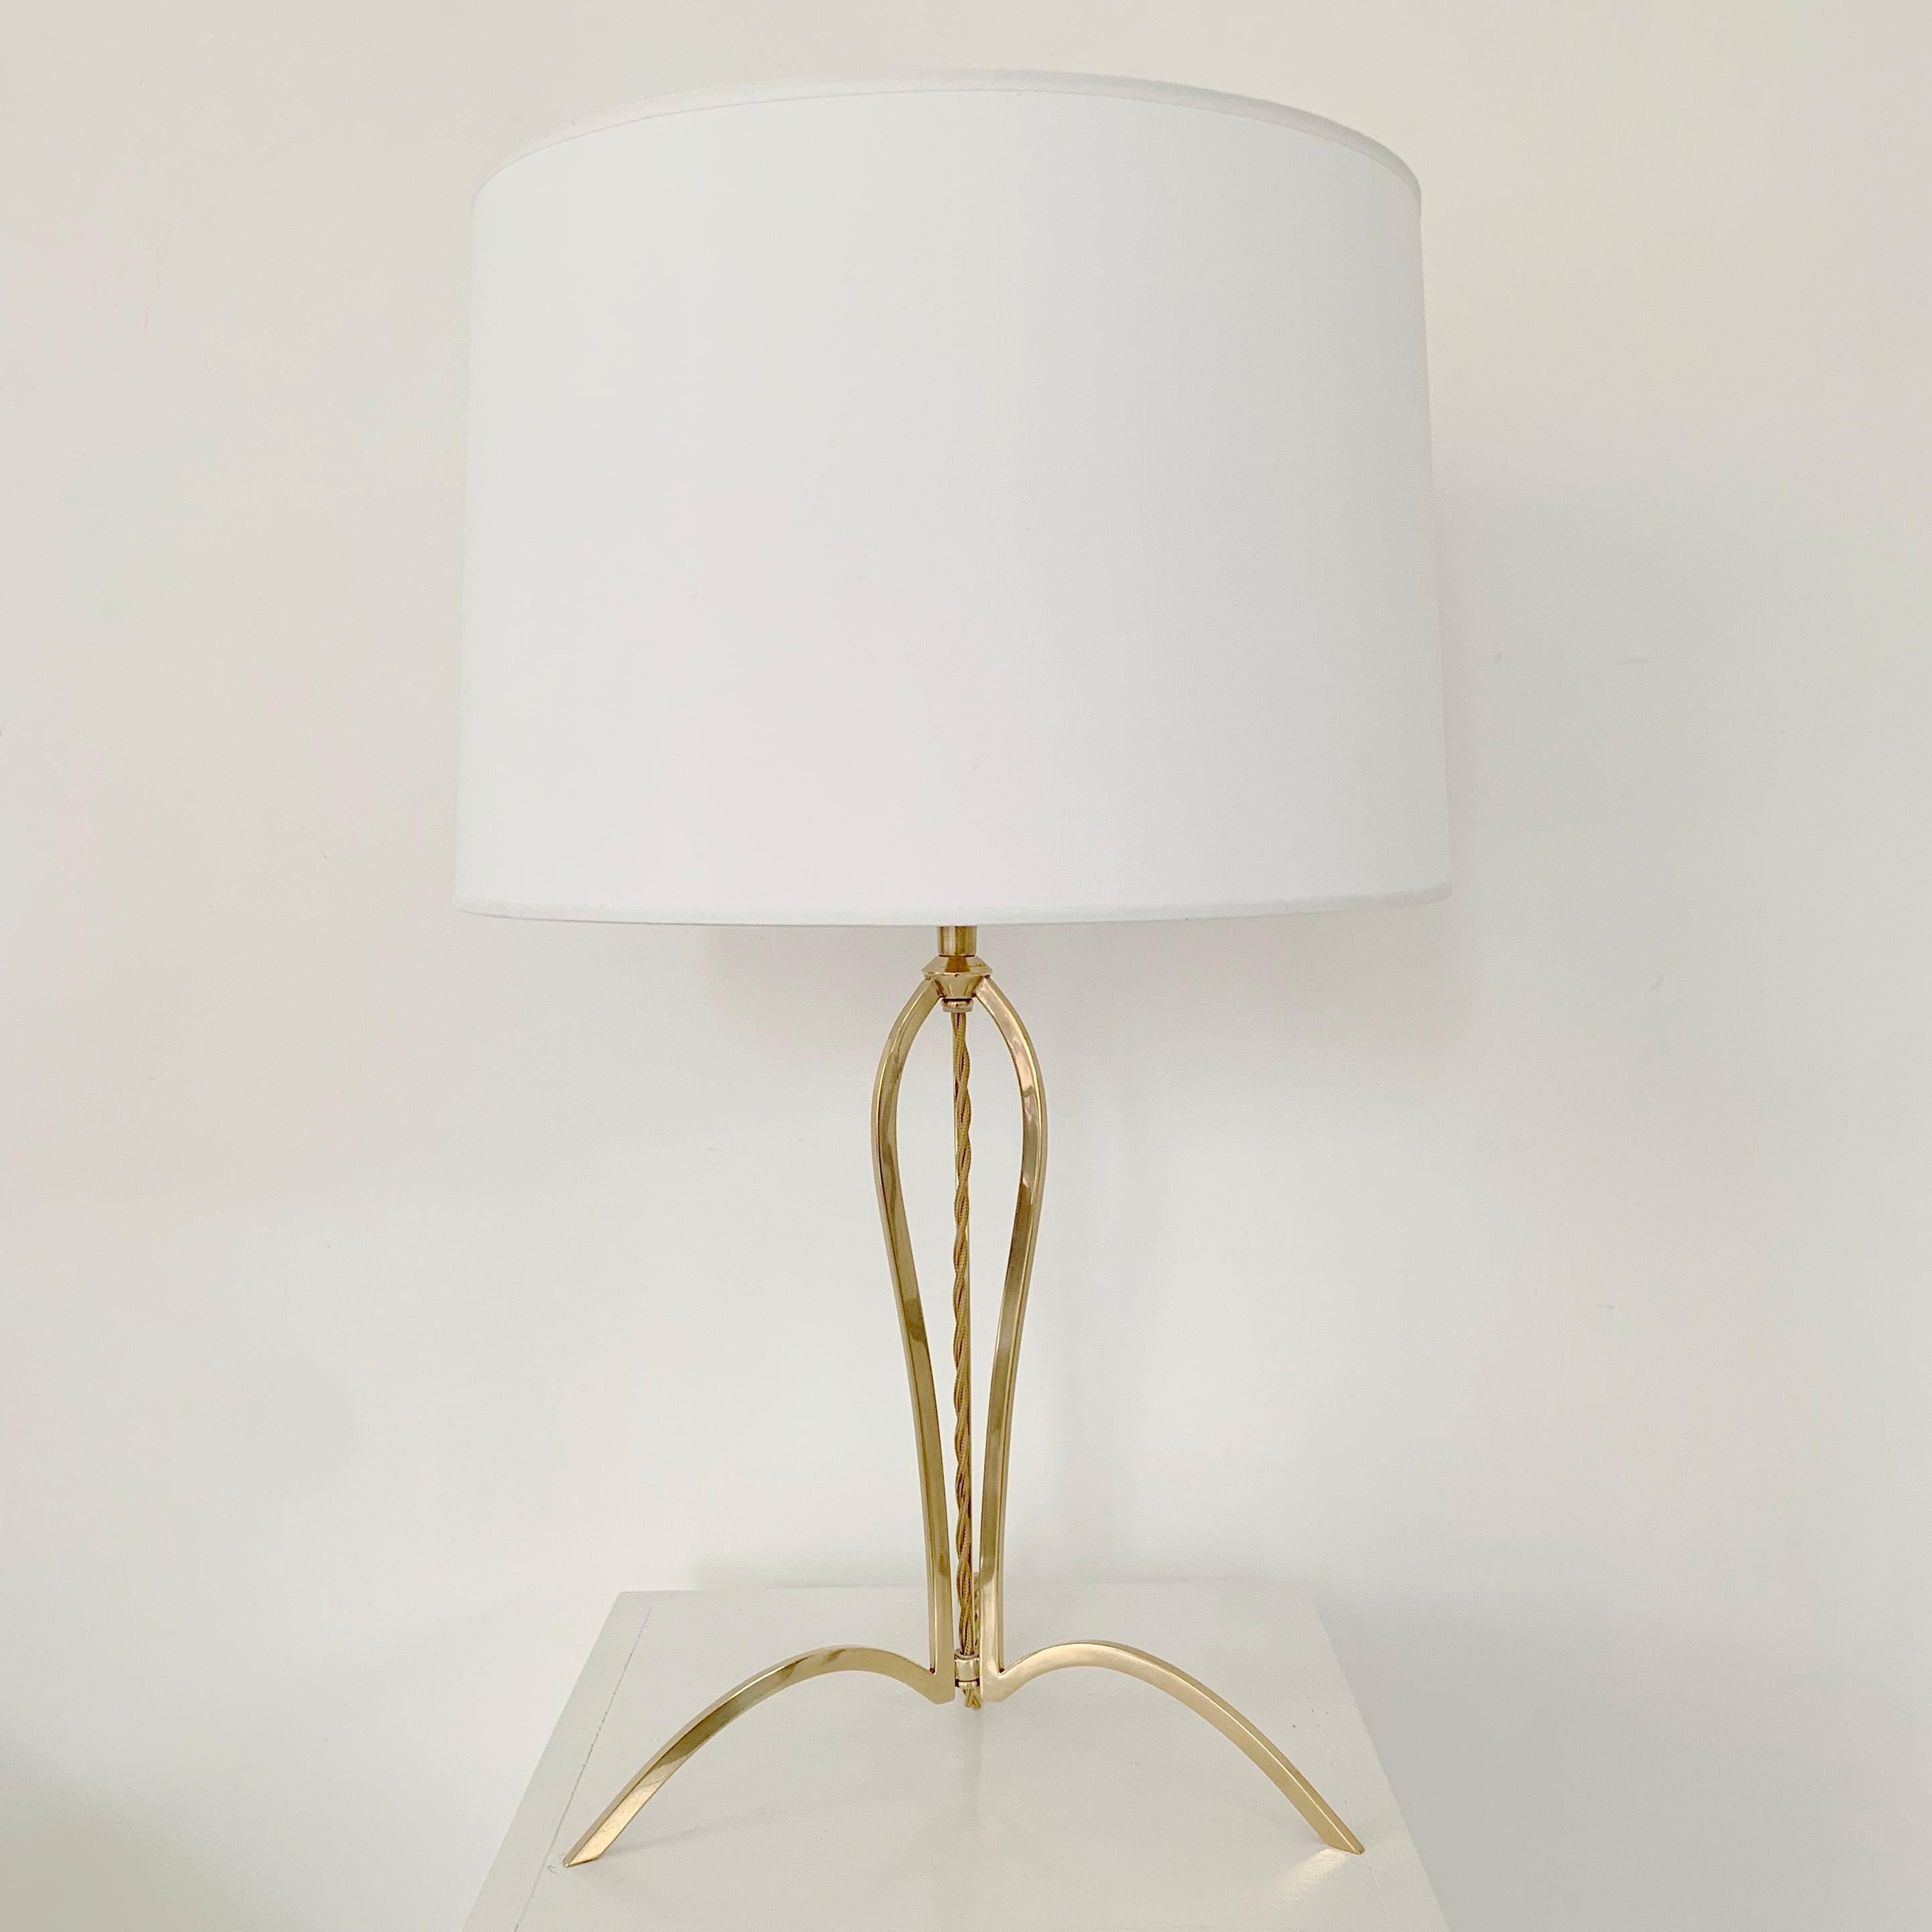 Elegant tripod table lamp, circa 1960, Italy.
Polished brass, new fabric shade.
Rewired, ready for US or EUR use. One bulb.
Dimensions: total height: 59 cm, diameter of the shade: 34 cm.
Good condition. Simple design but very chic.
All purchases are